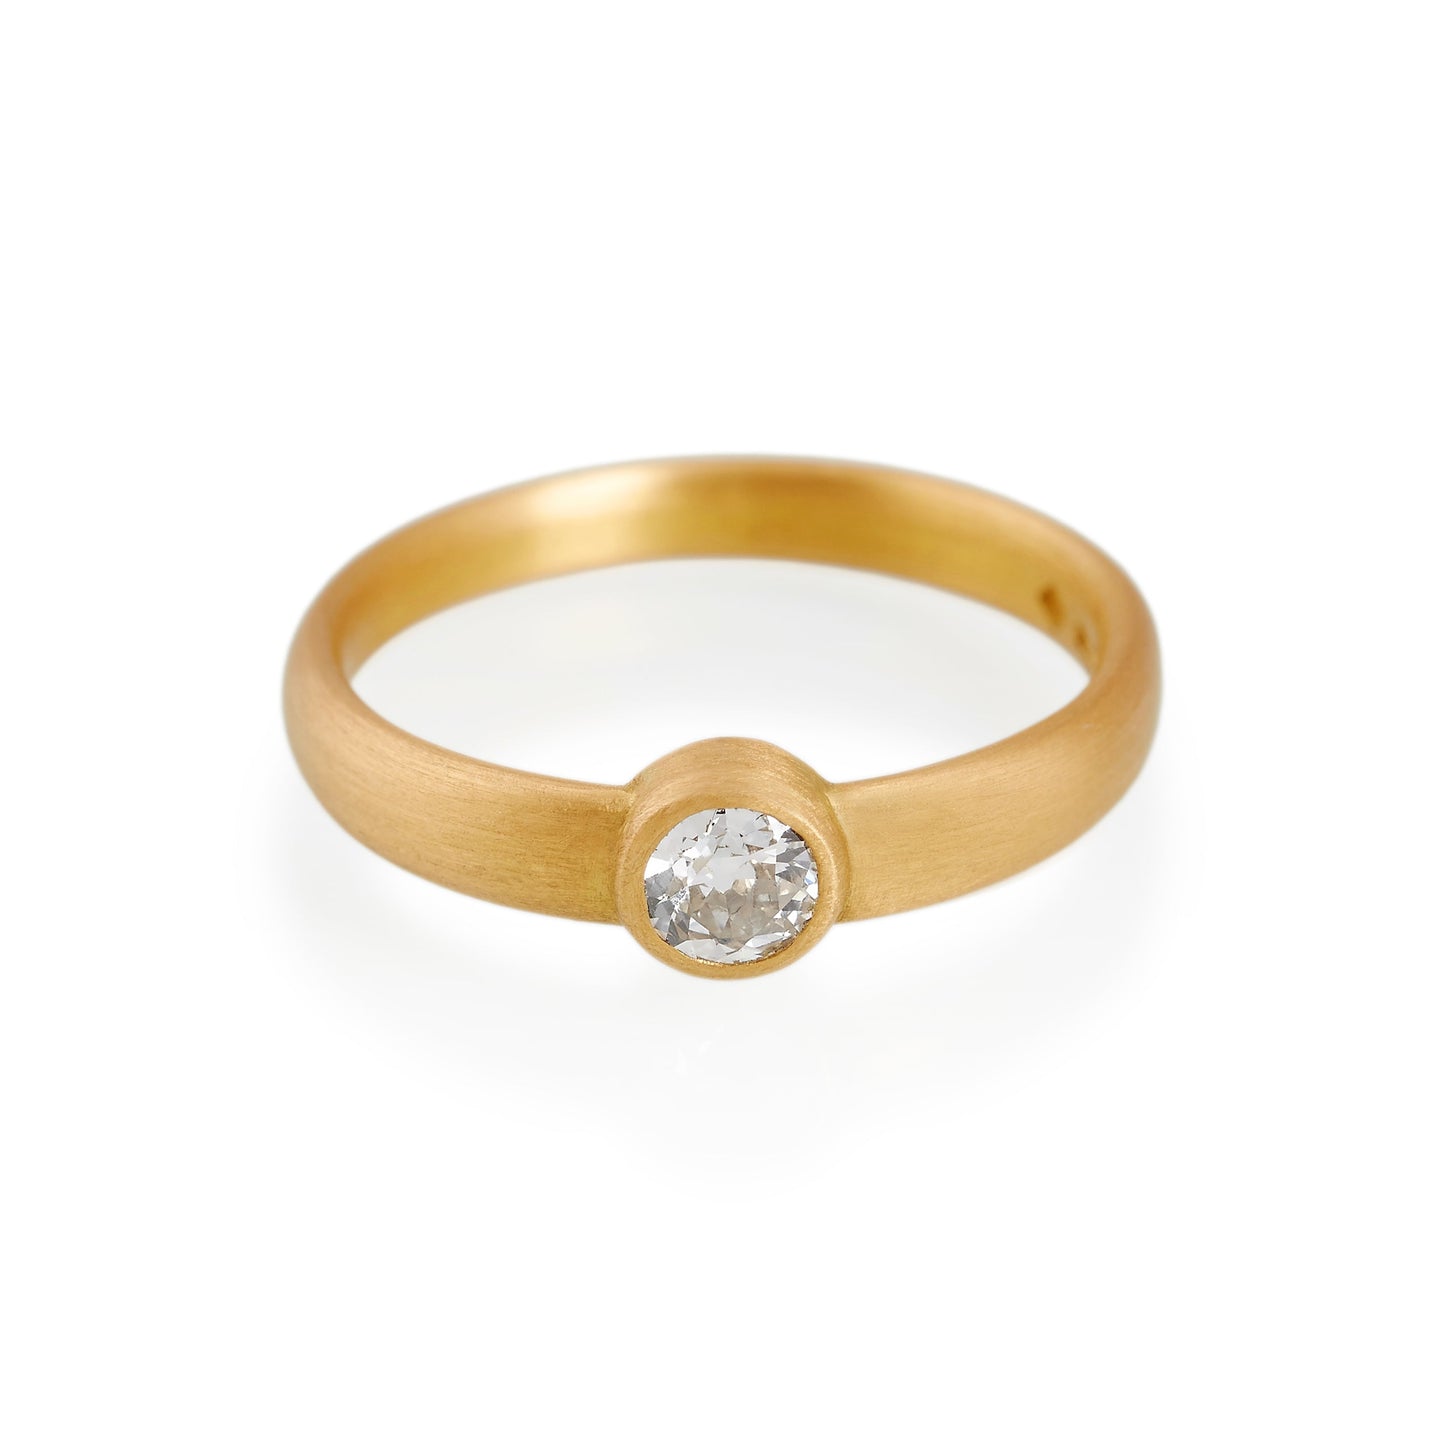 Antique Round Cut Diamond Tapered Ring, 22ct Gold